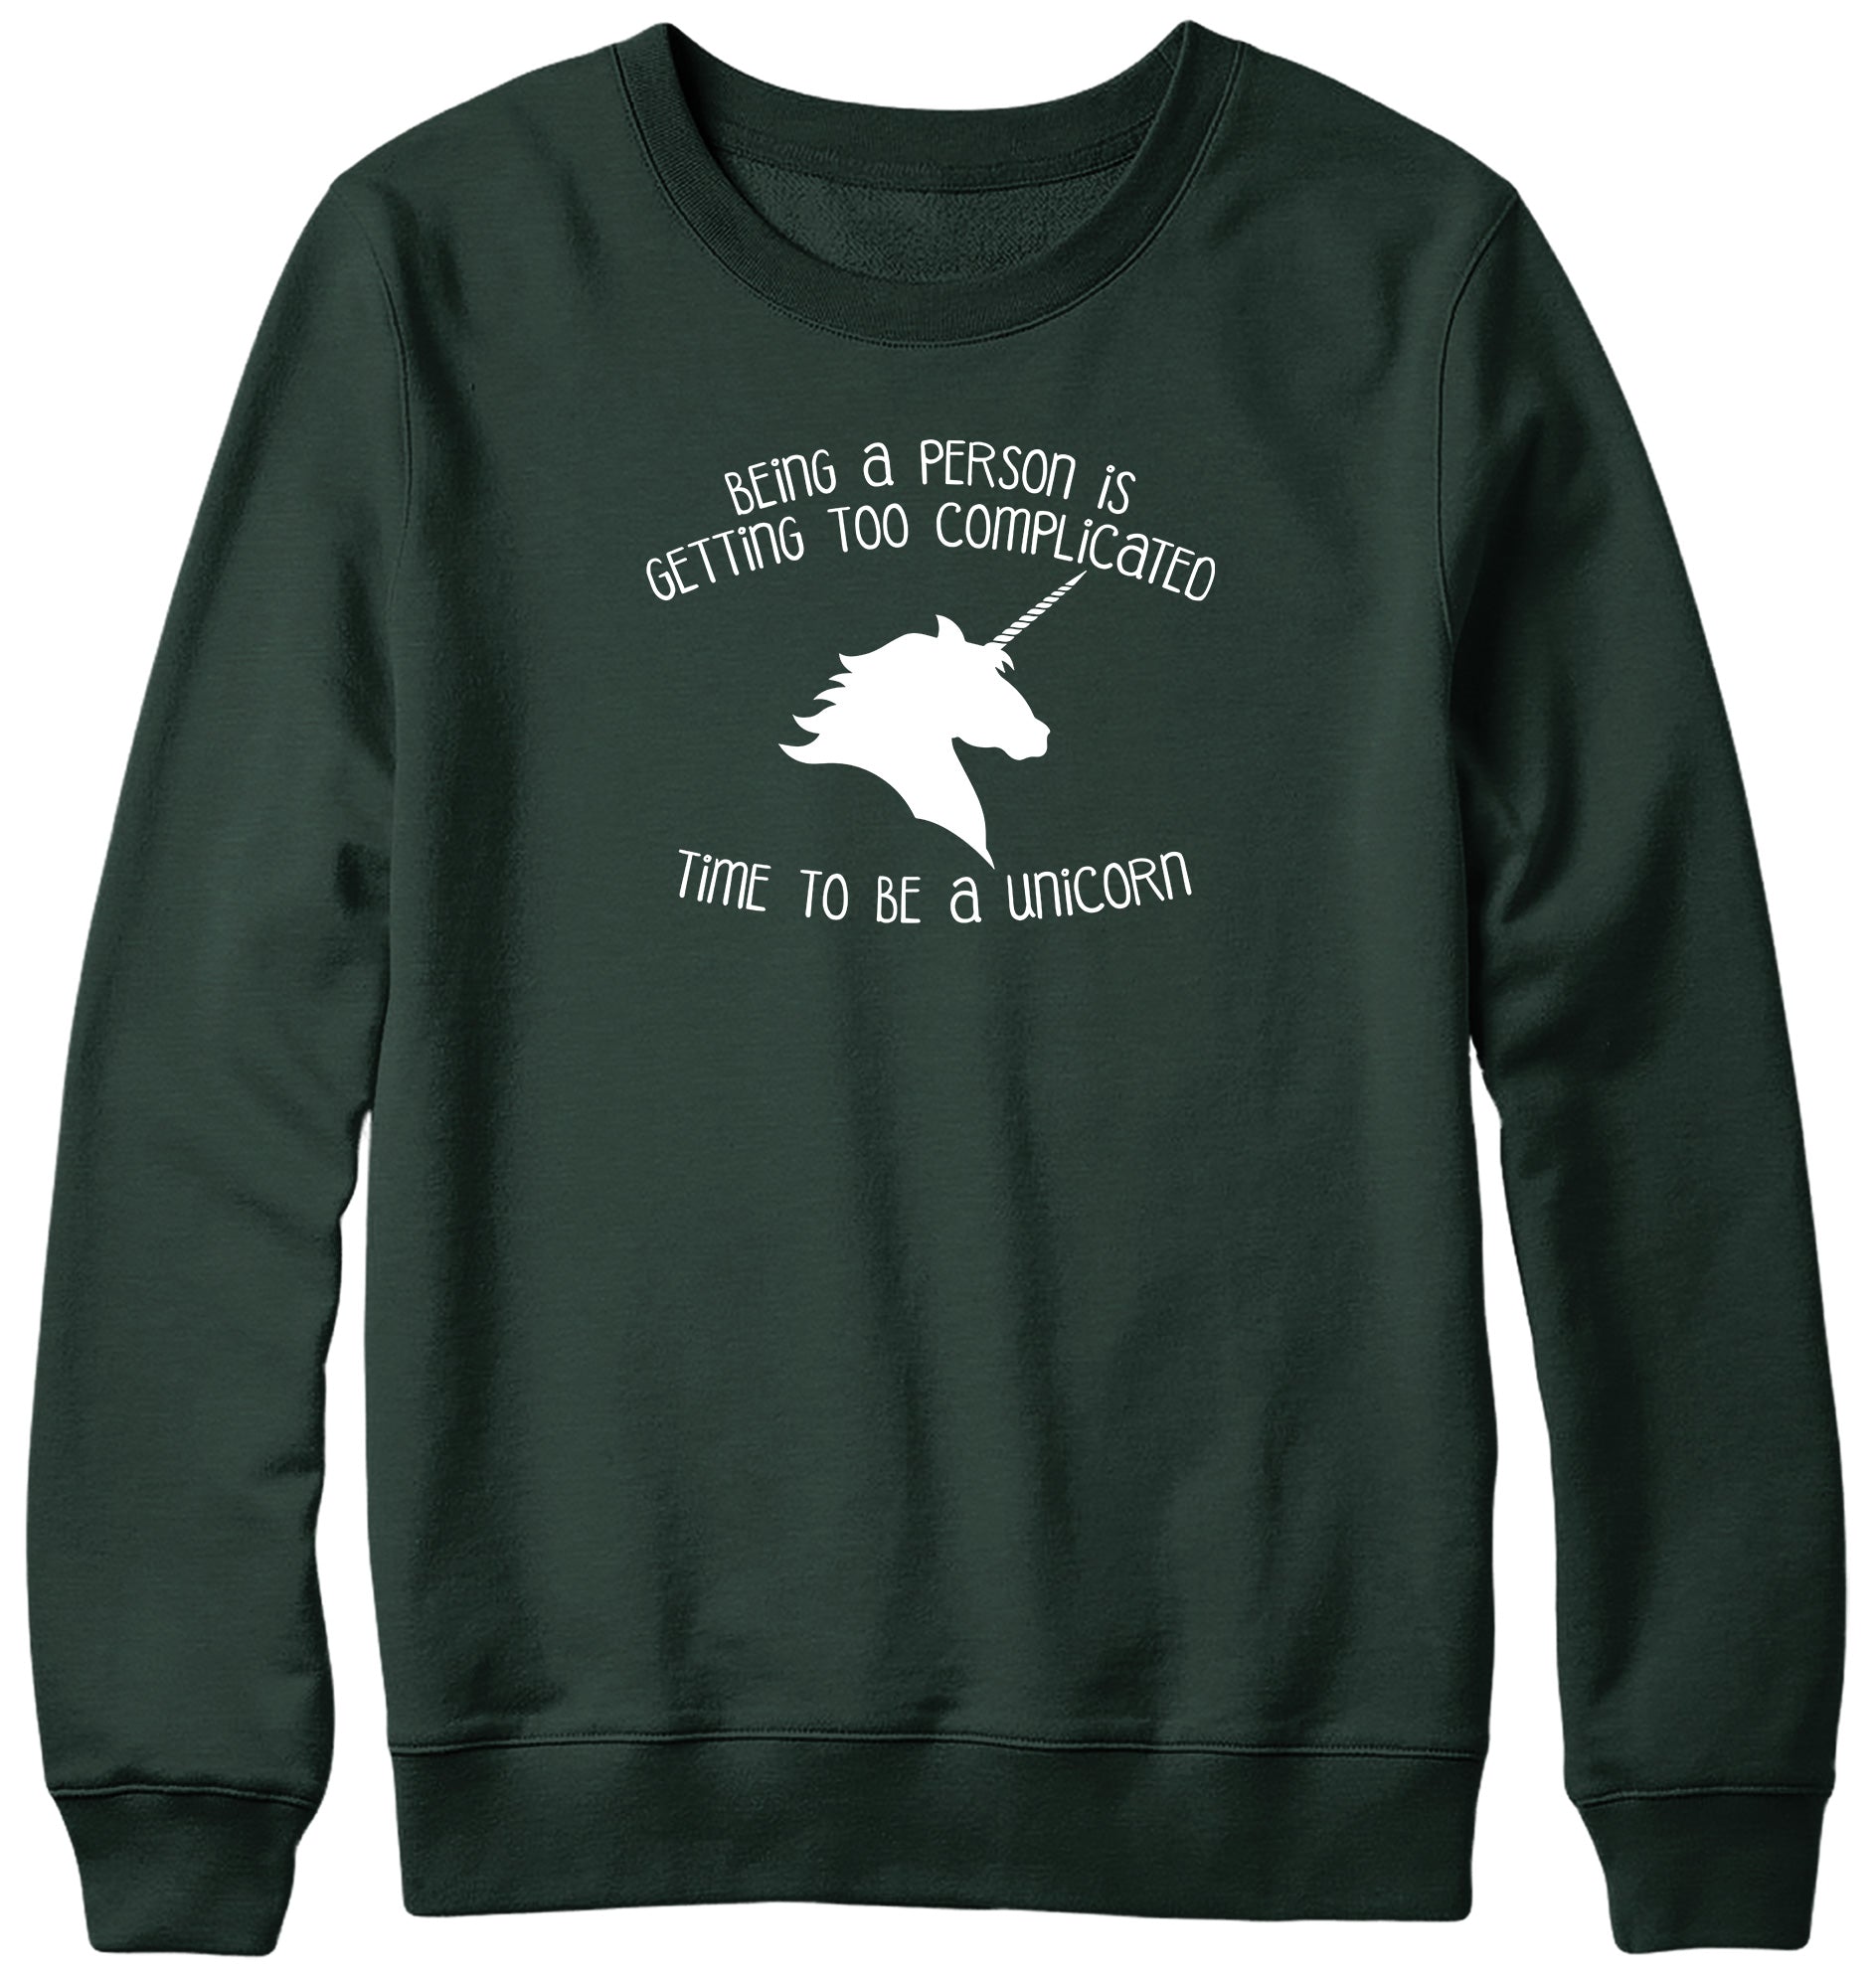 BEING A PERSON IS GETTING TOO COMPLICATED  TIME TO BE A UNICORN MENS LADIES WOMENS UNISEX SWEATSHIRT SWEATER